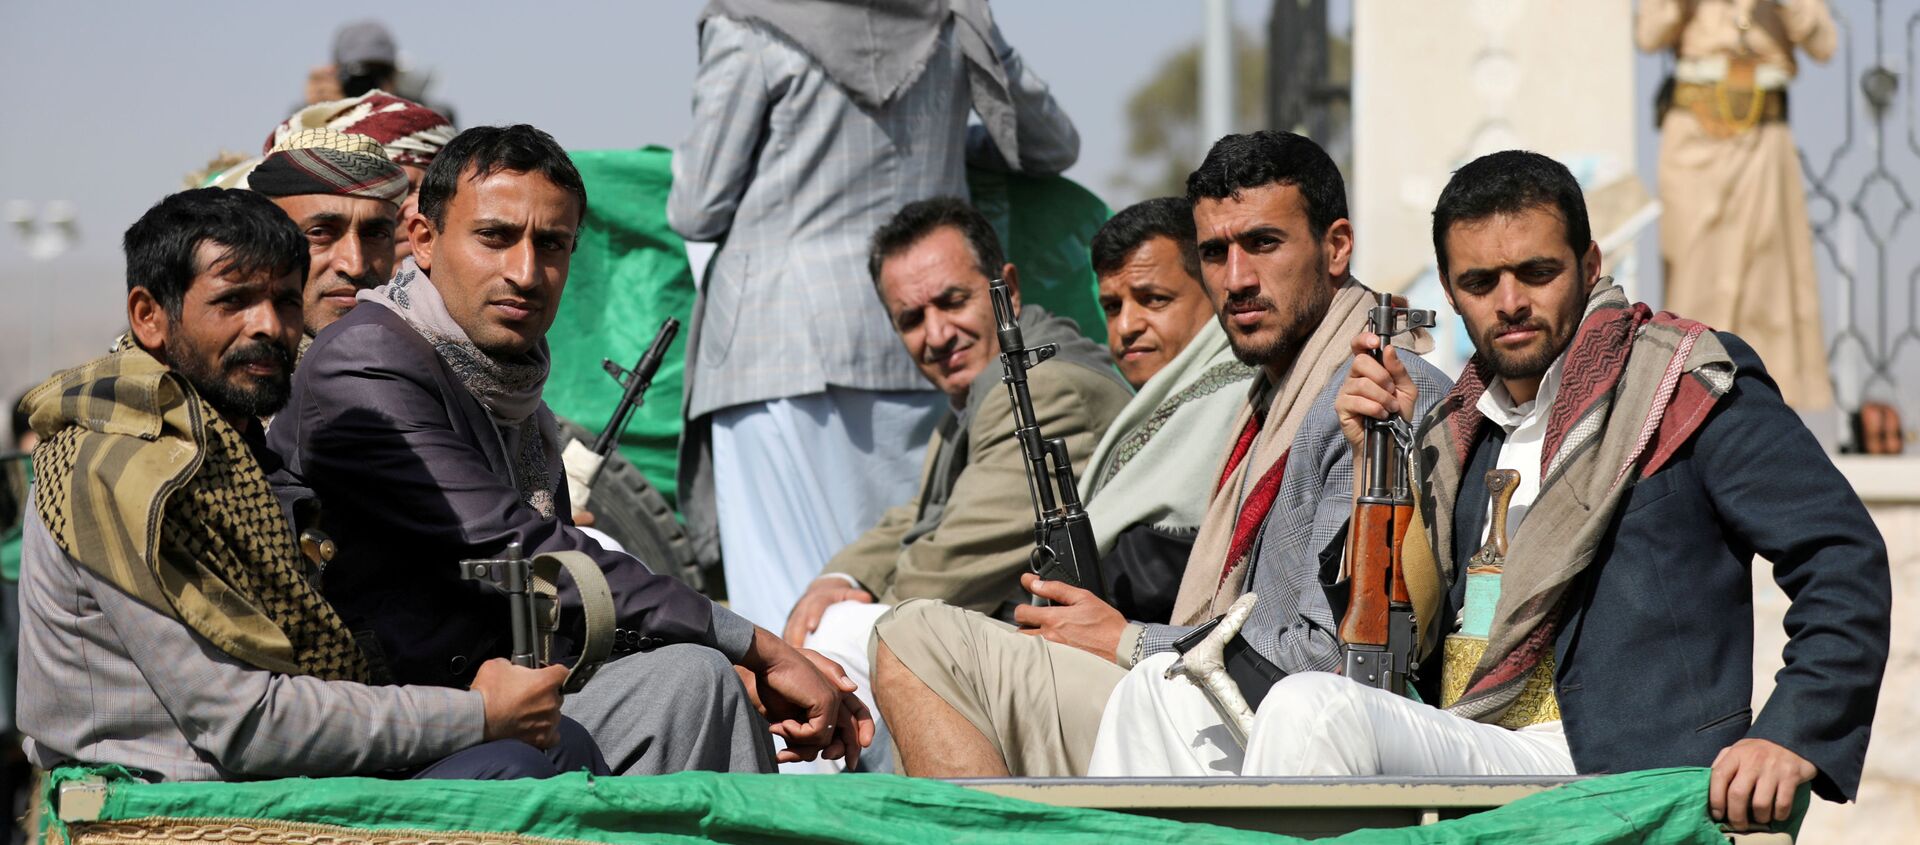 Armed Houthi followers ride on the back of a truck after participating in a funeral of Houthi fighters killed in recent fighting against government forces in Yemen's oil-rich province of Marib, in Sanaa, Yemen February 20, 2021.  - Sputnik International, 1920, 16.03.2021